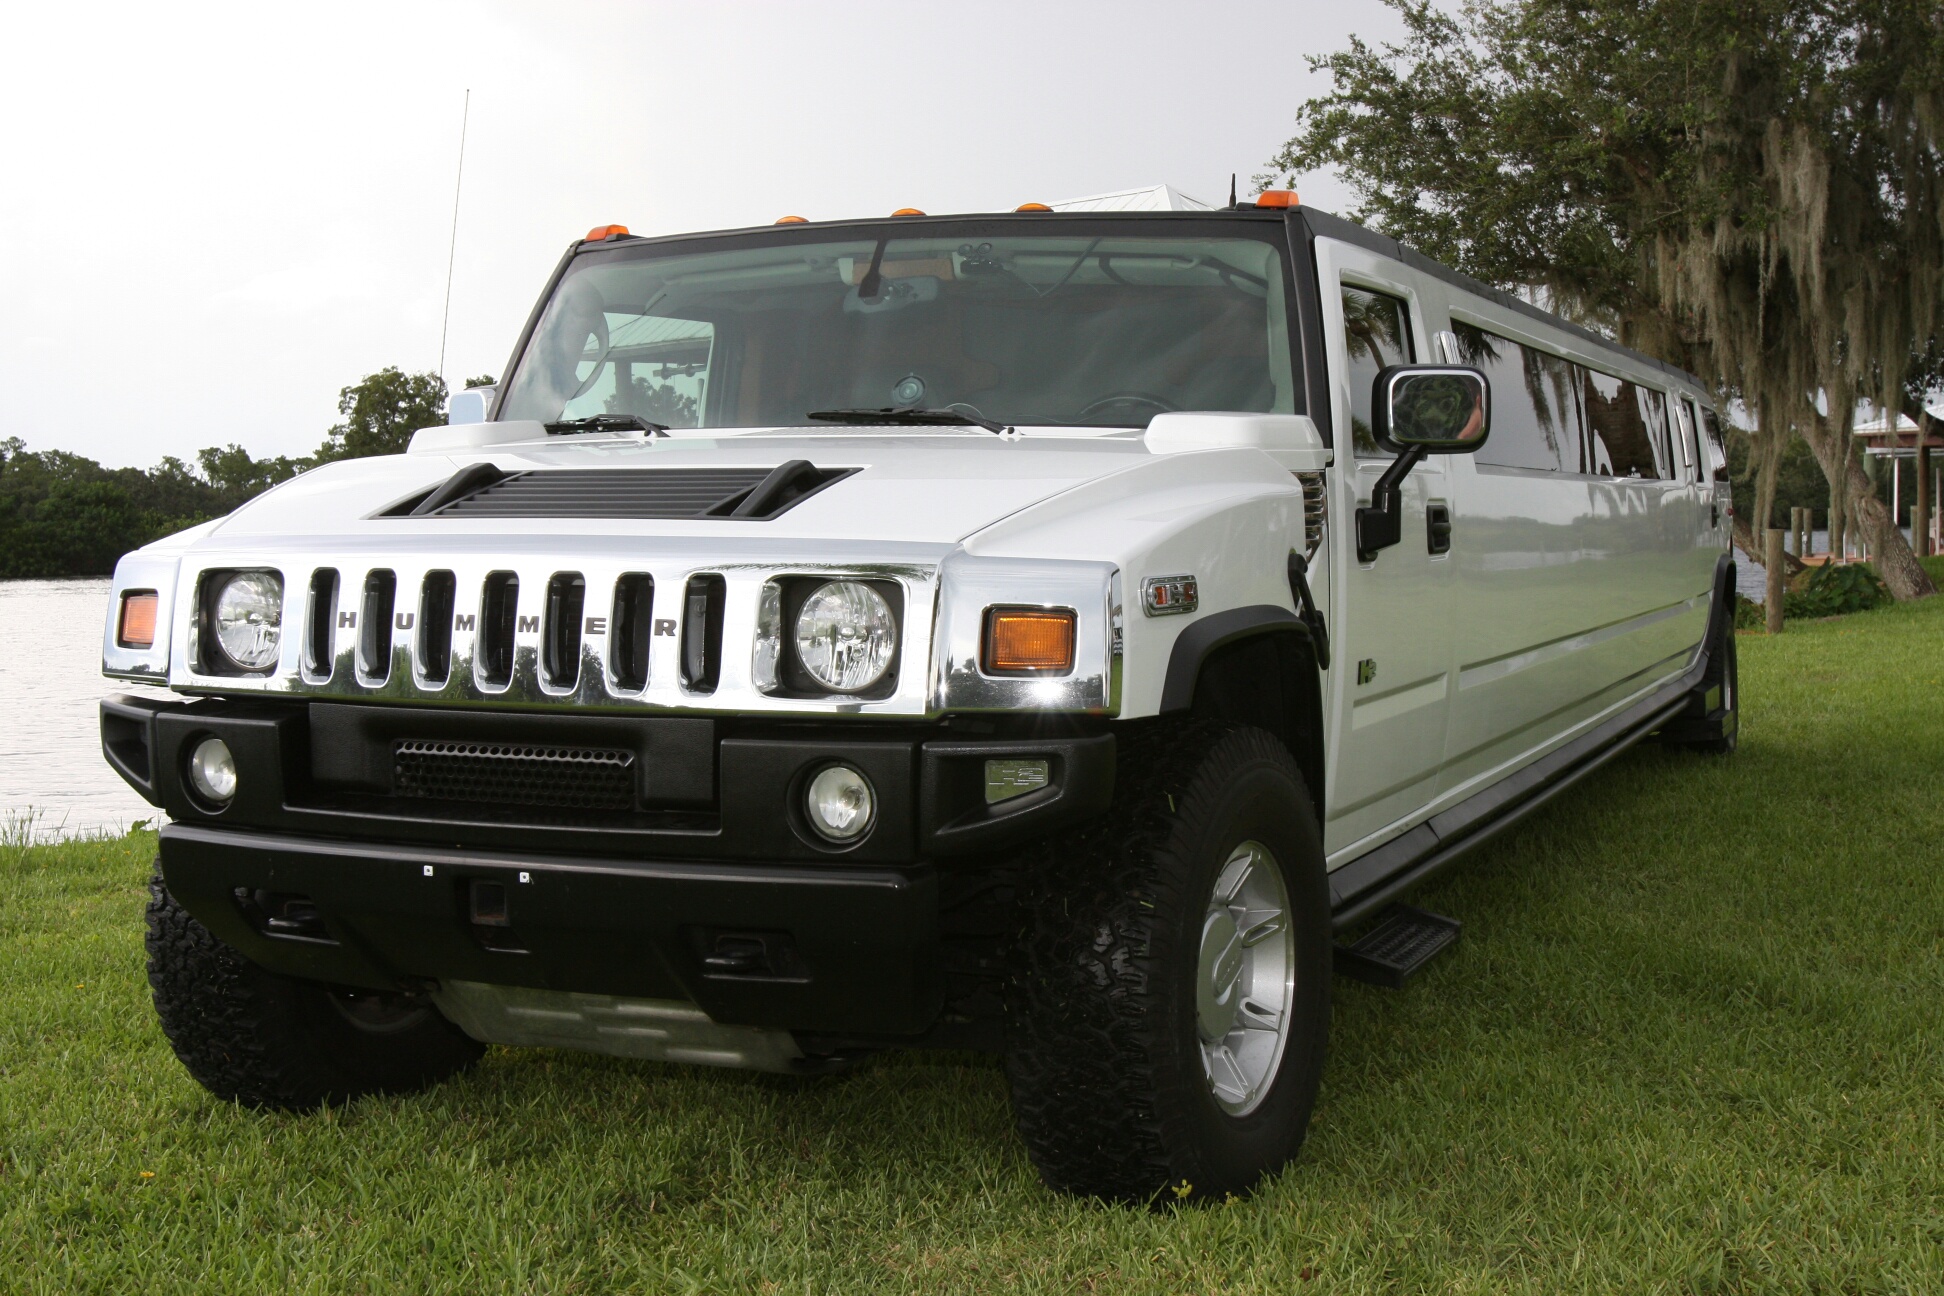 Casselberry White Hummer Limo 